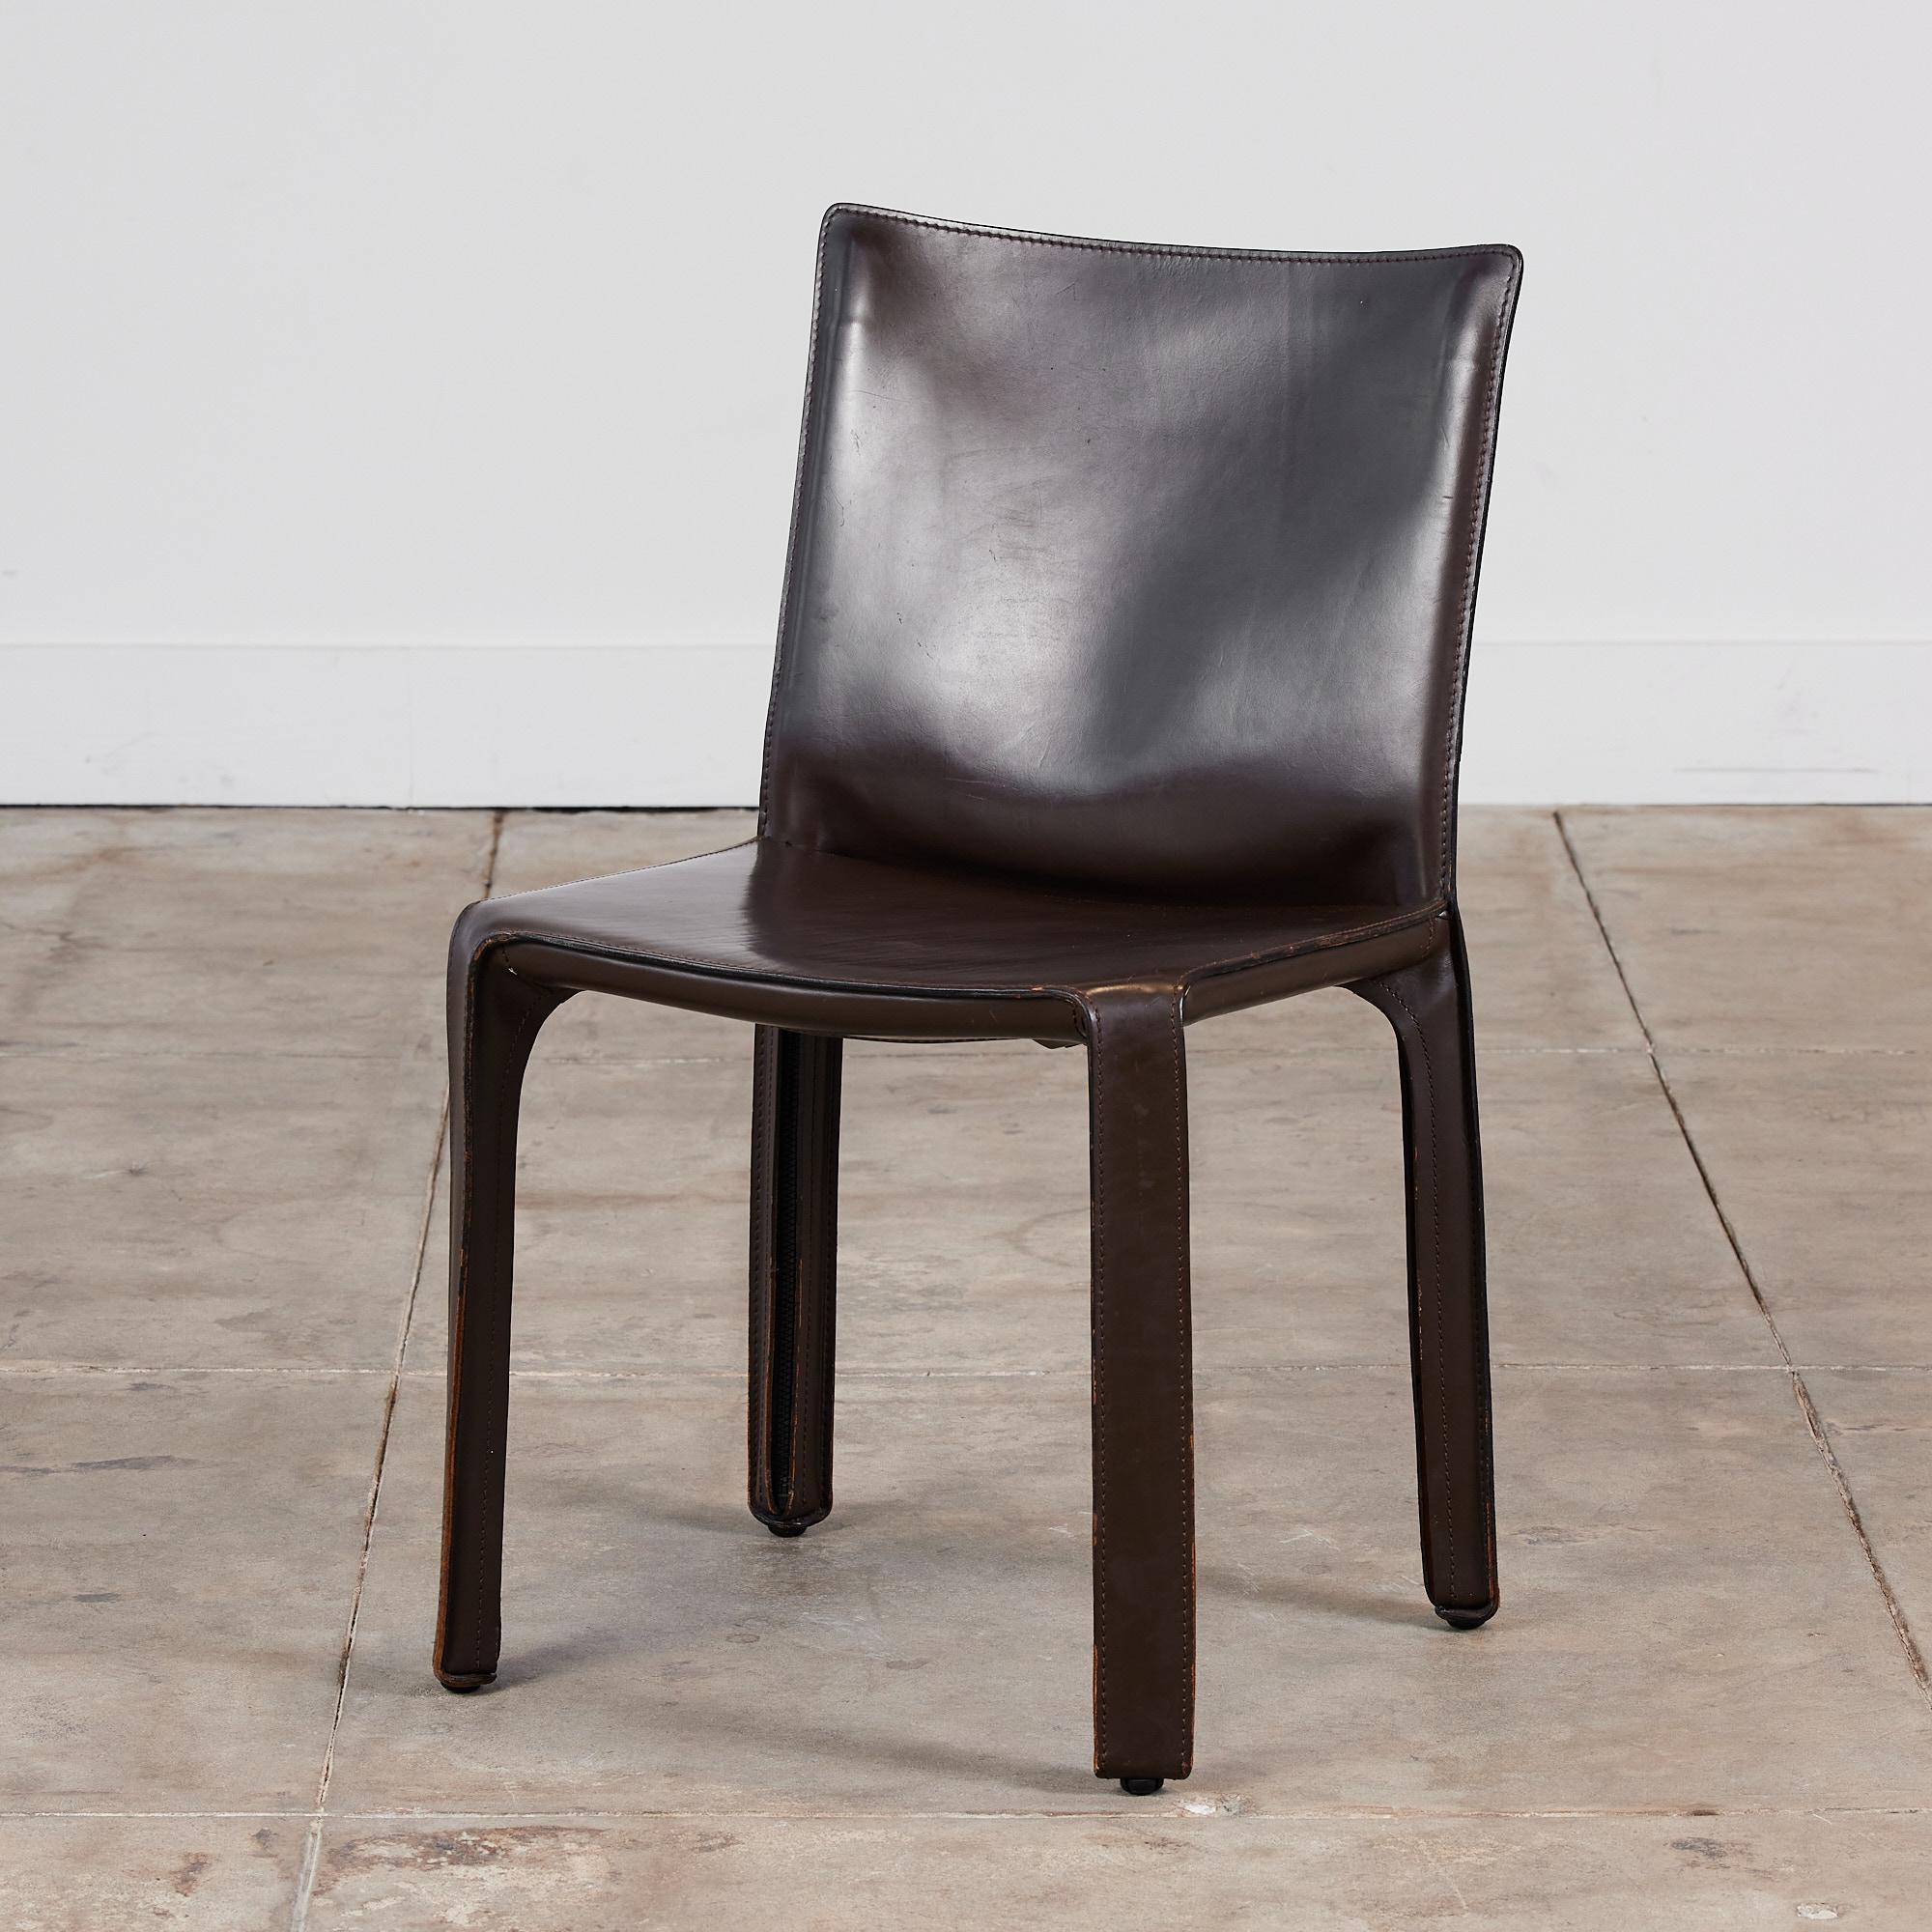 This iconic design by Mario Bellini for Cassina c.1970s, Italy, features the original deep brown saddle leather which is wrapped atop a steel frame. The back legs feature a black zippered detail. The bottom of the chairs are marked - Cassina.

One